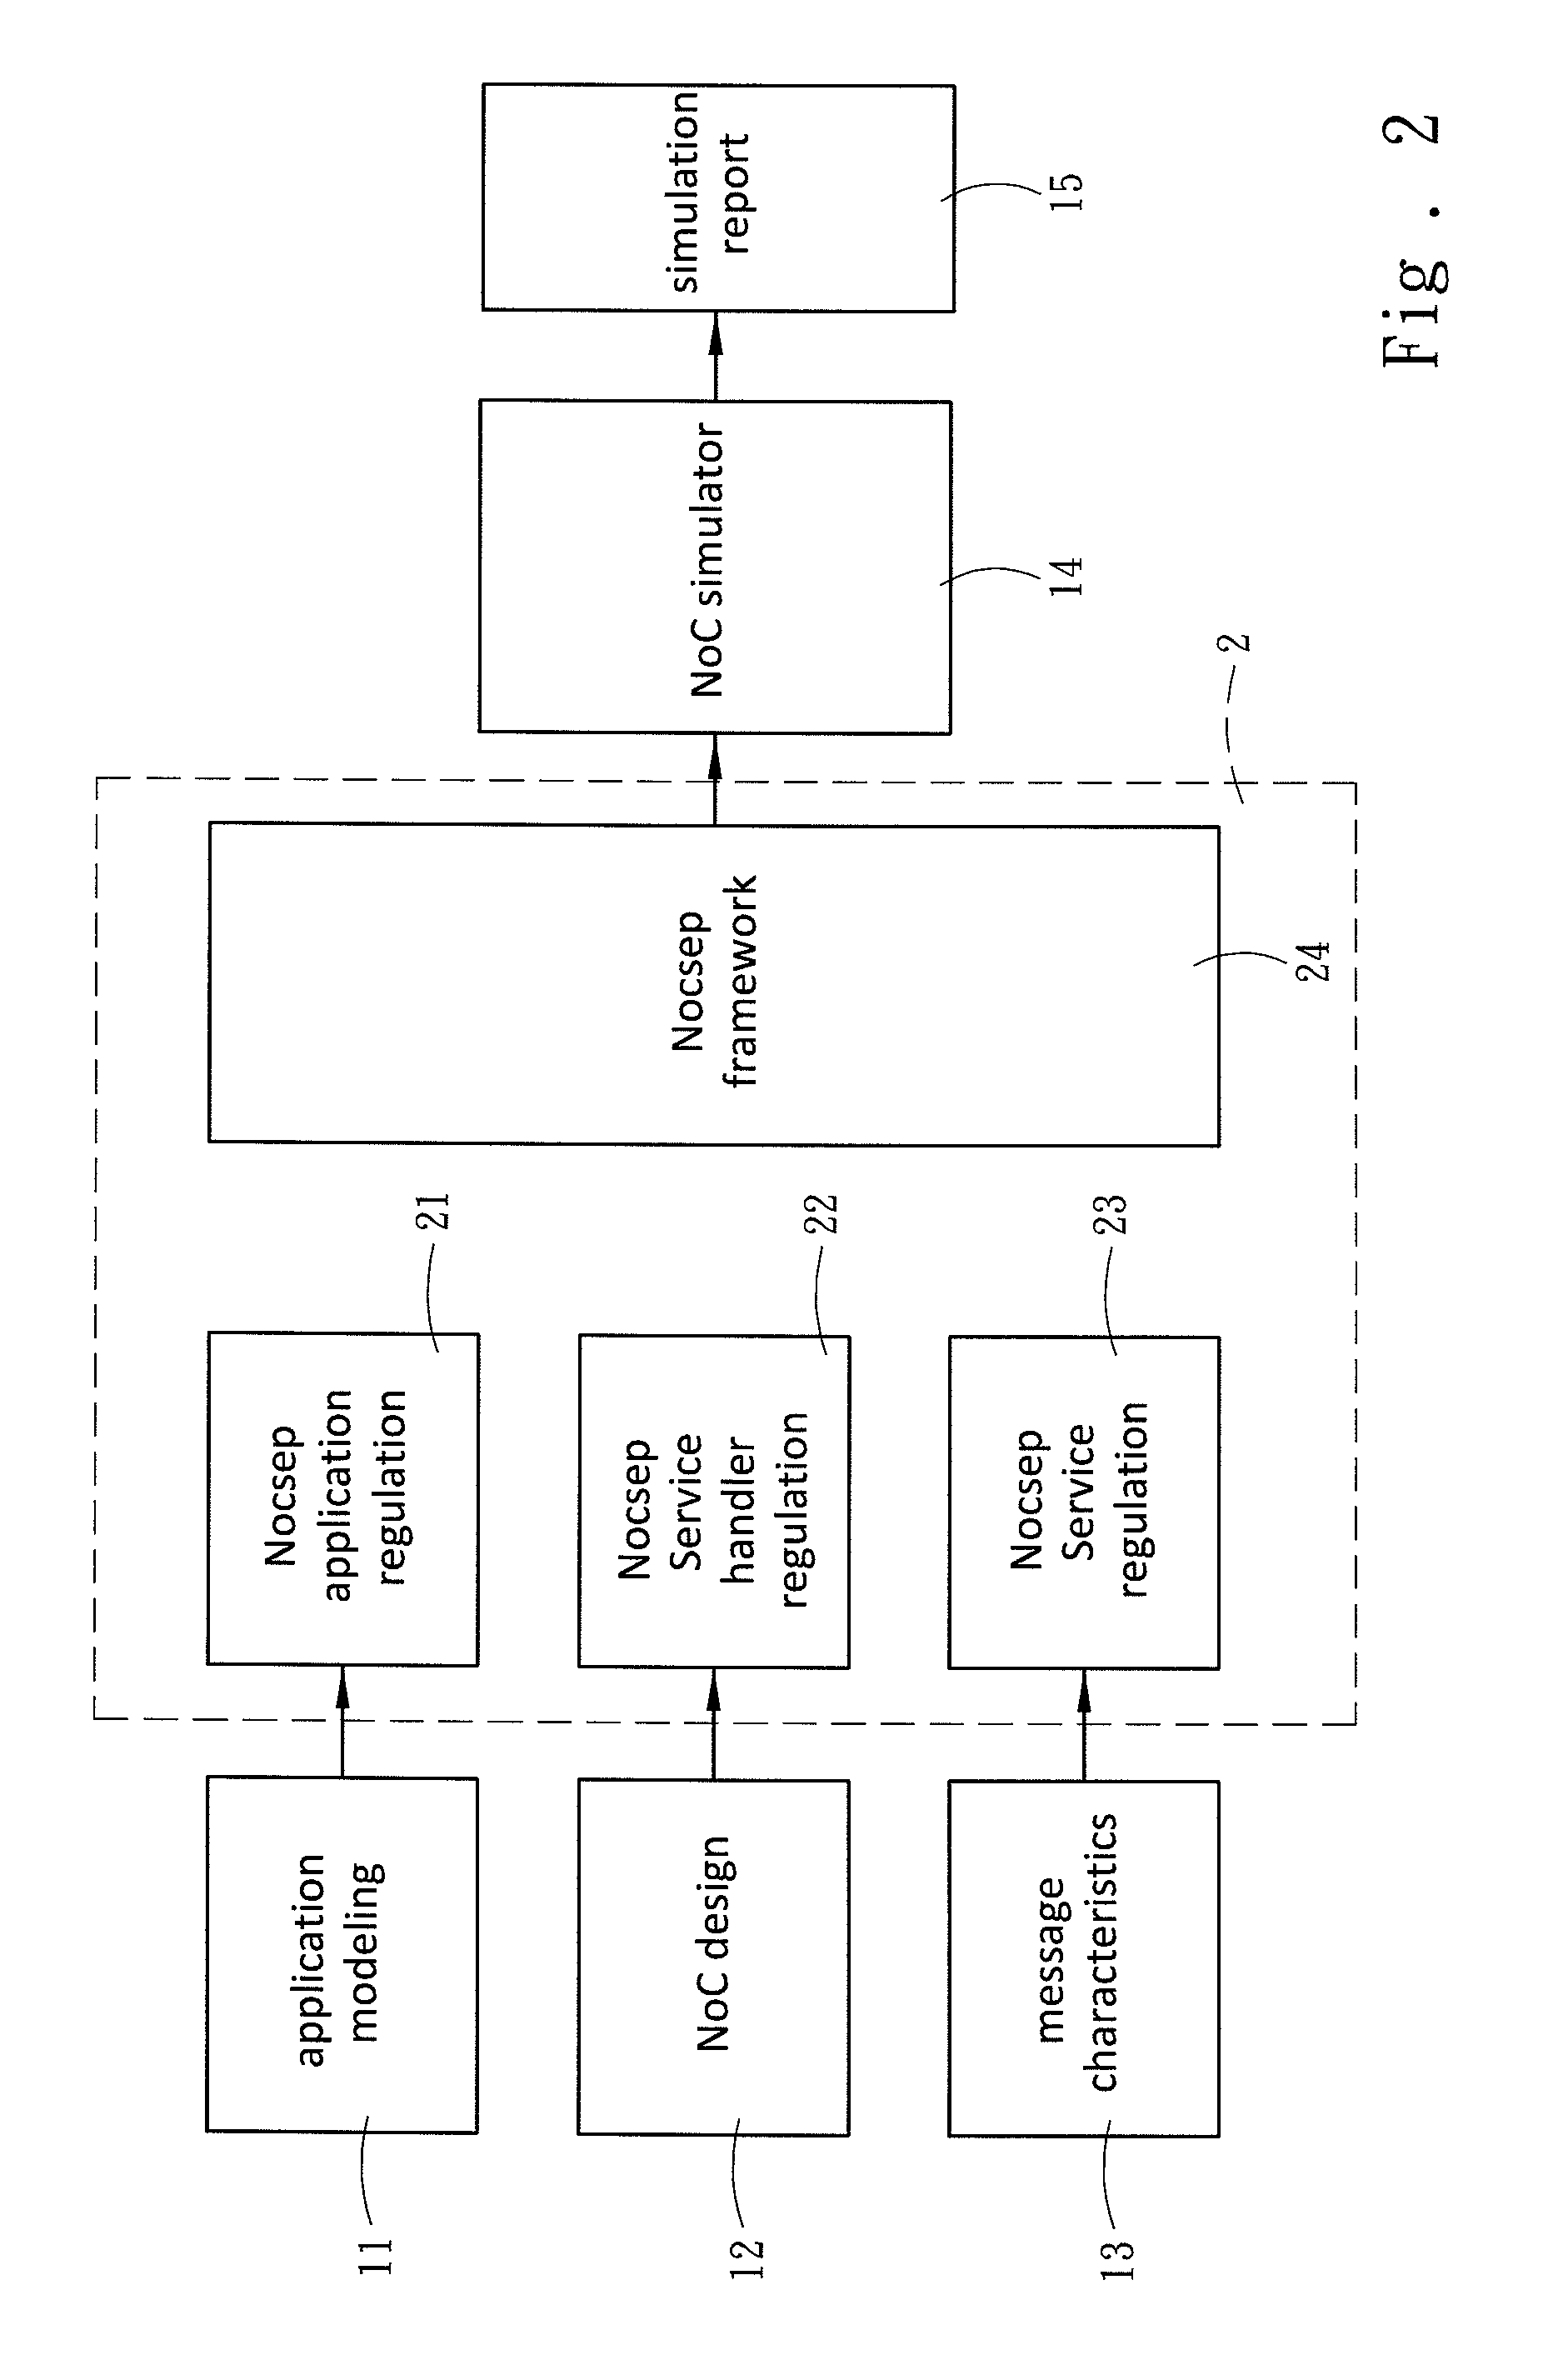 Noc-centric system exploration platform and parallel application communication mechanism description format used by the same